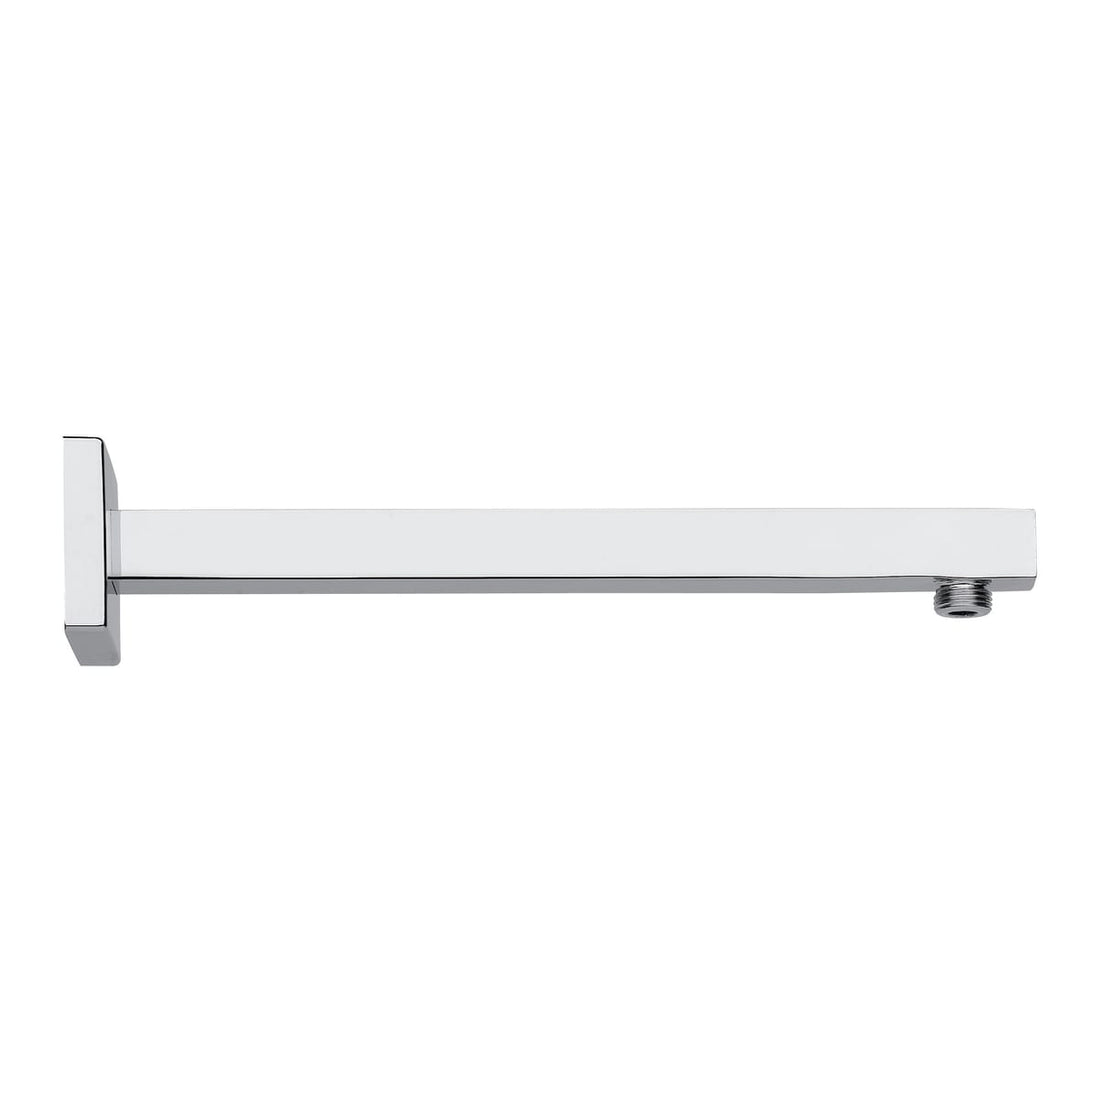 WALL-MOUNTED SHOWER ARM SQUARE CM 40 LENGTH